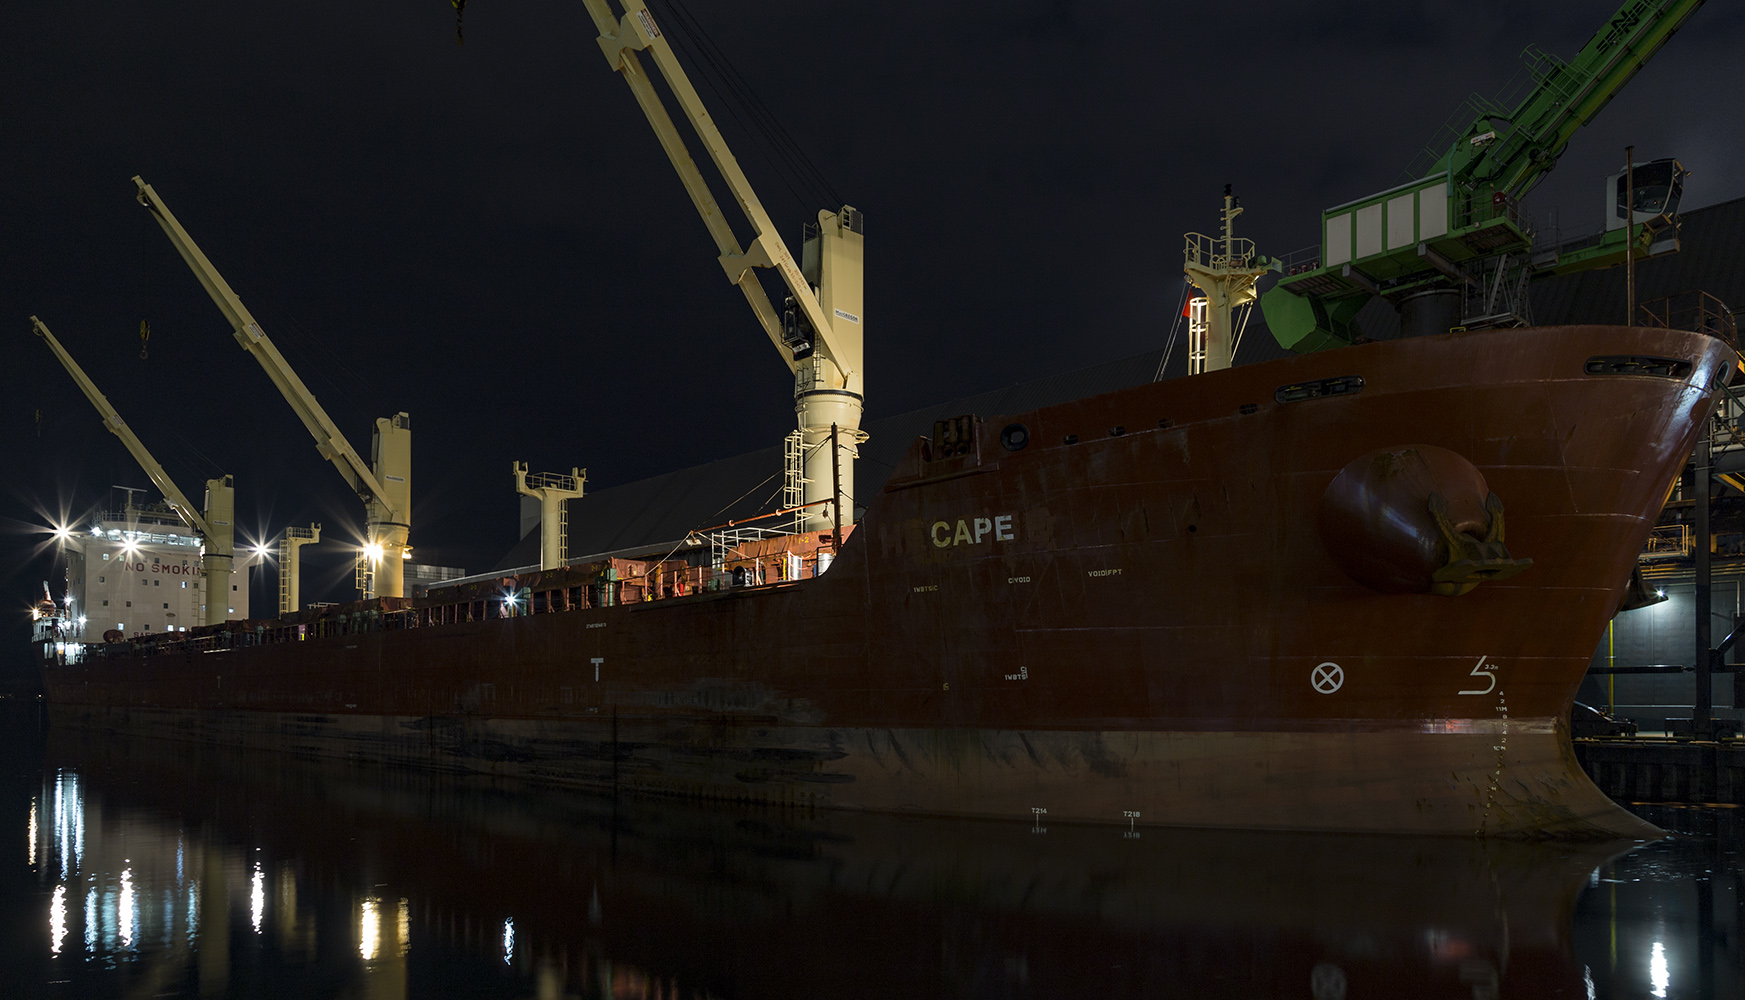 20161127. The 186 m Liberian bulk carrier CAPE, moored at Jarvis